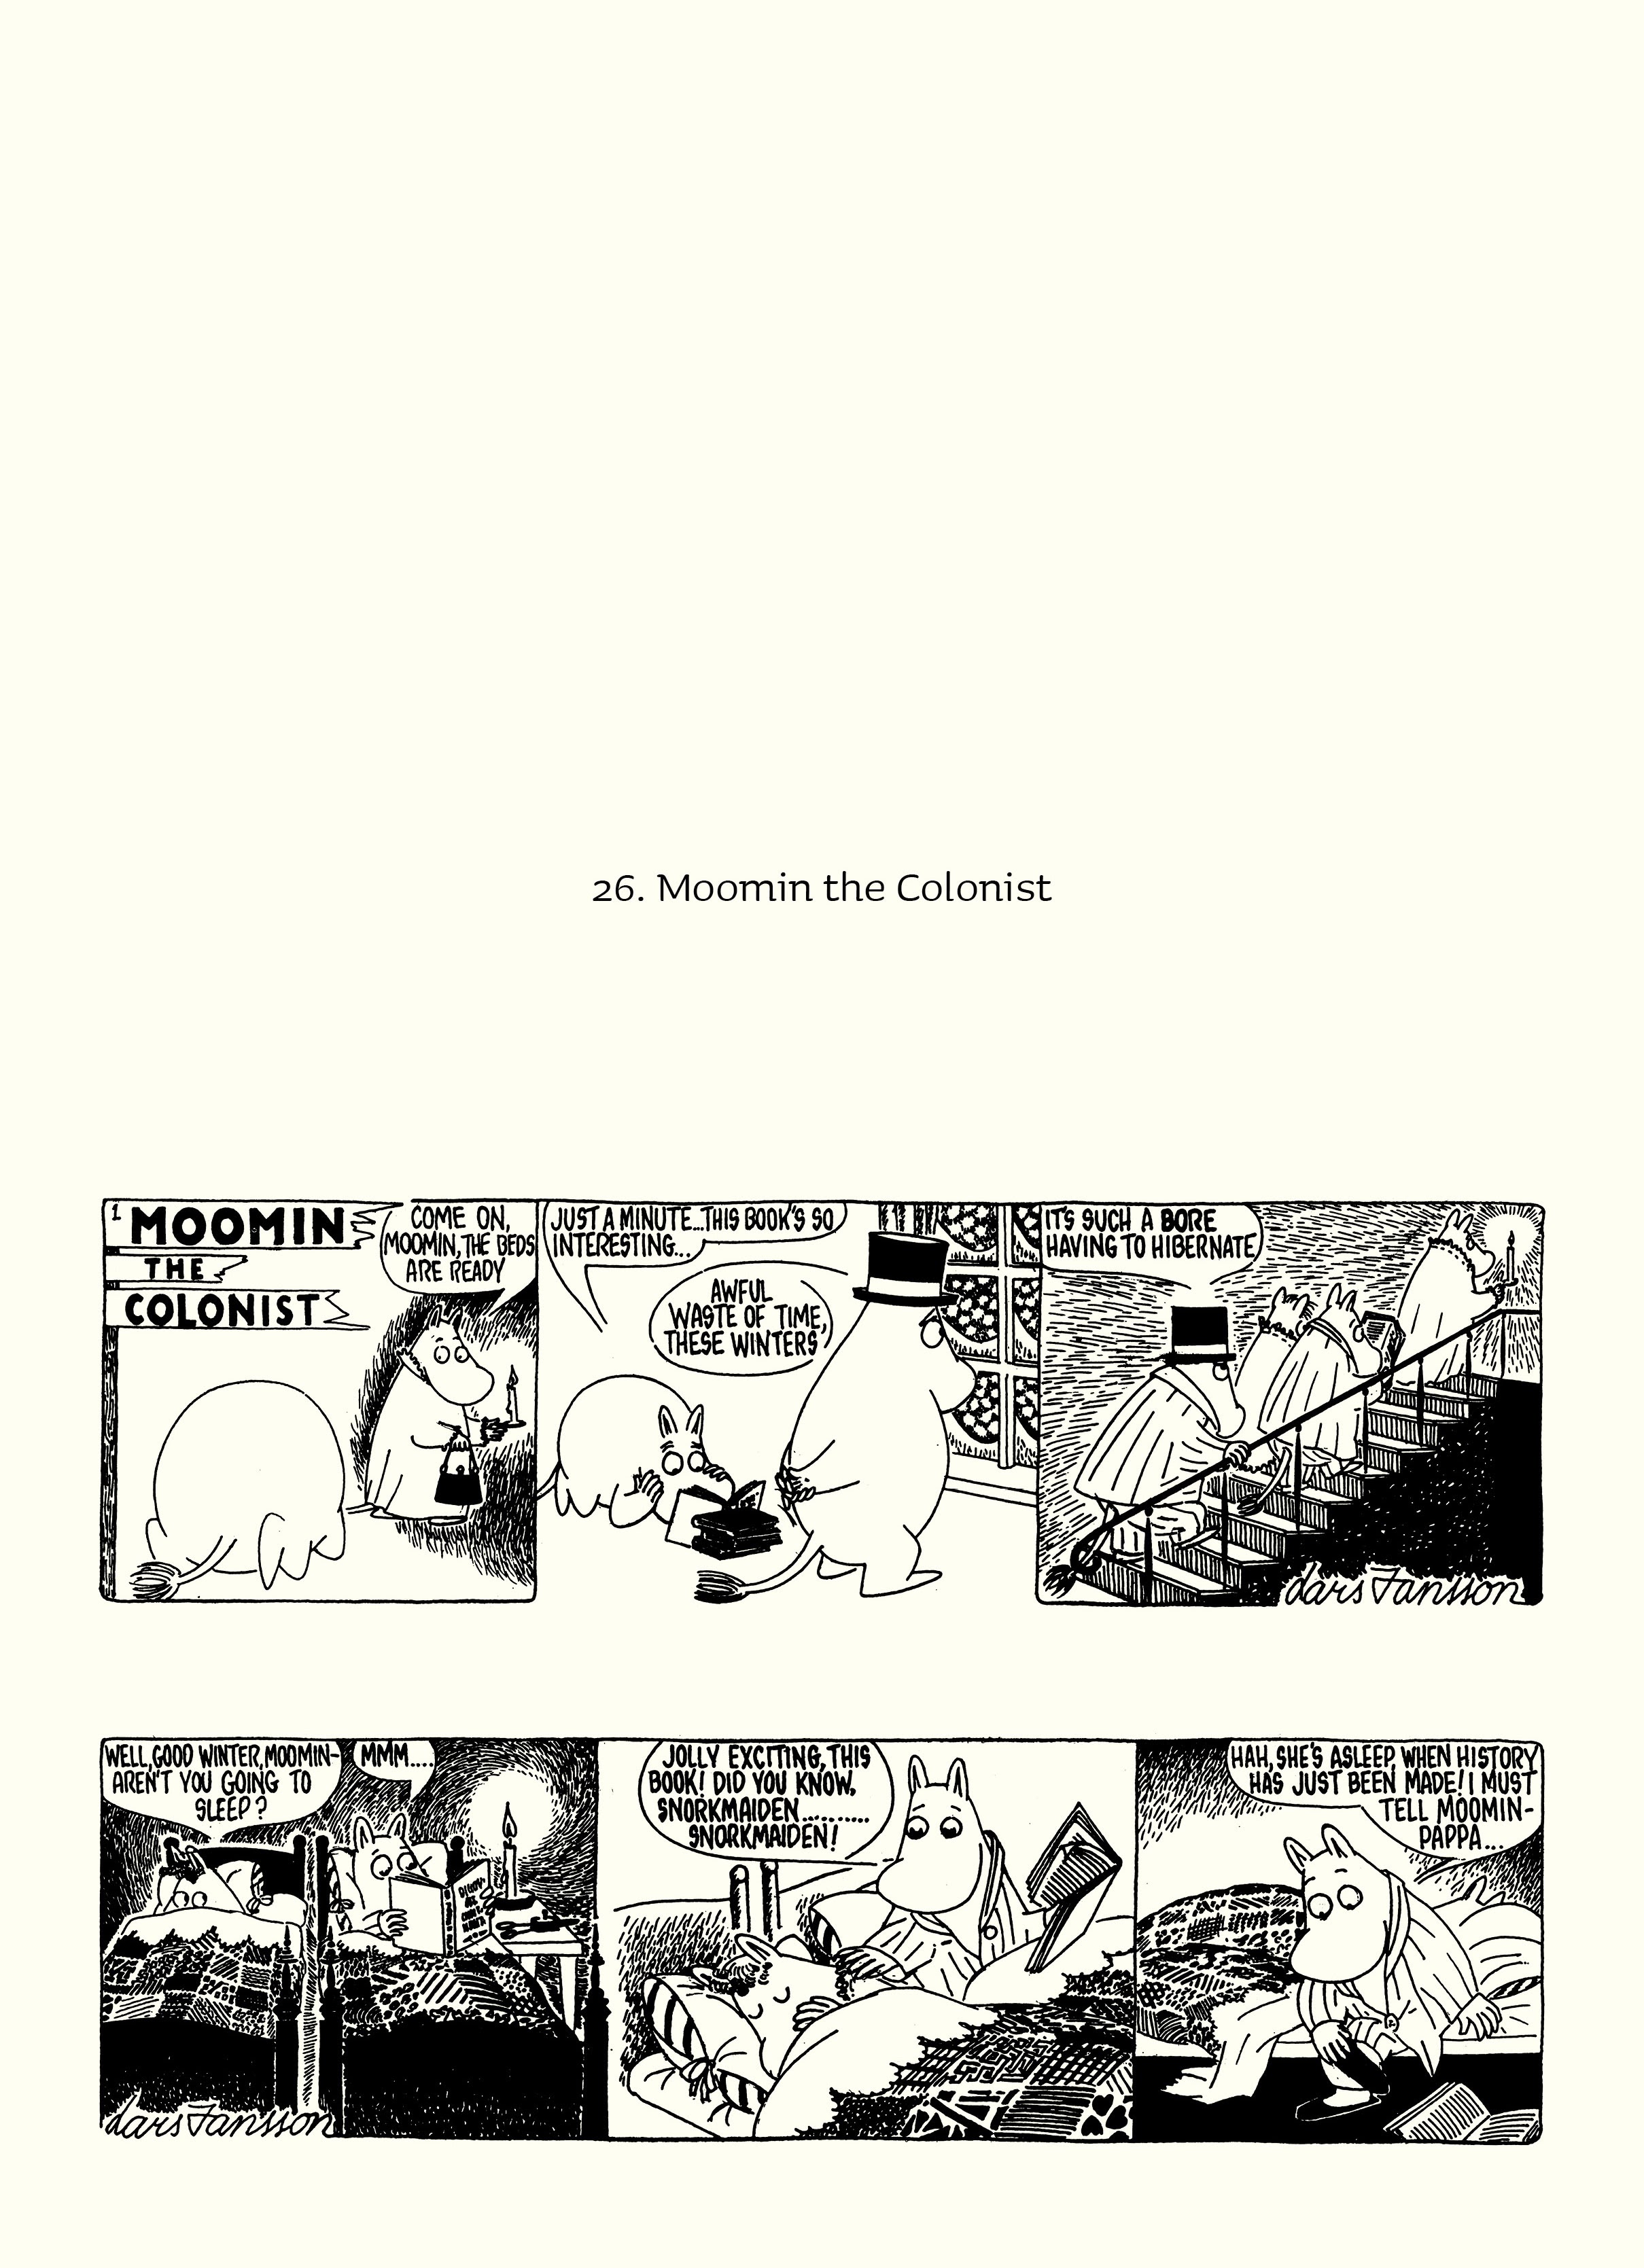 Read online Moomin: The Complete Lars Jansson Comic Strip comic -  Issue # TPB 7 - 6